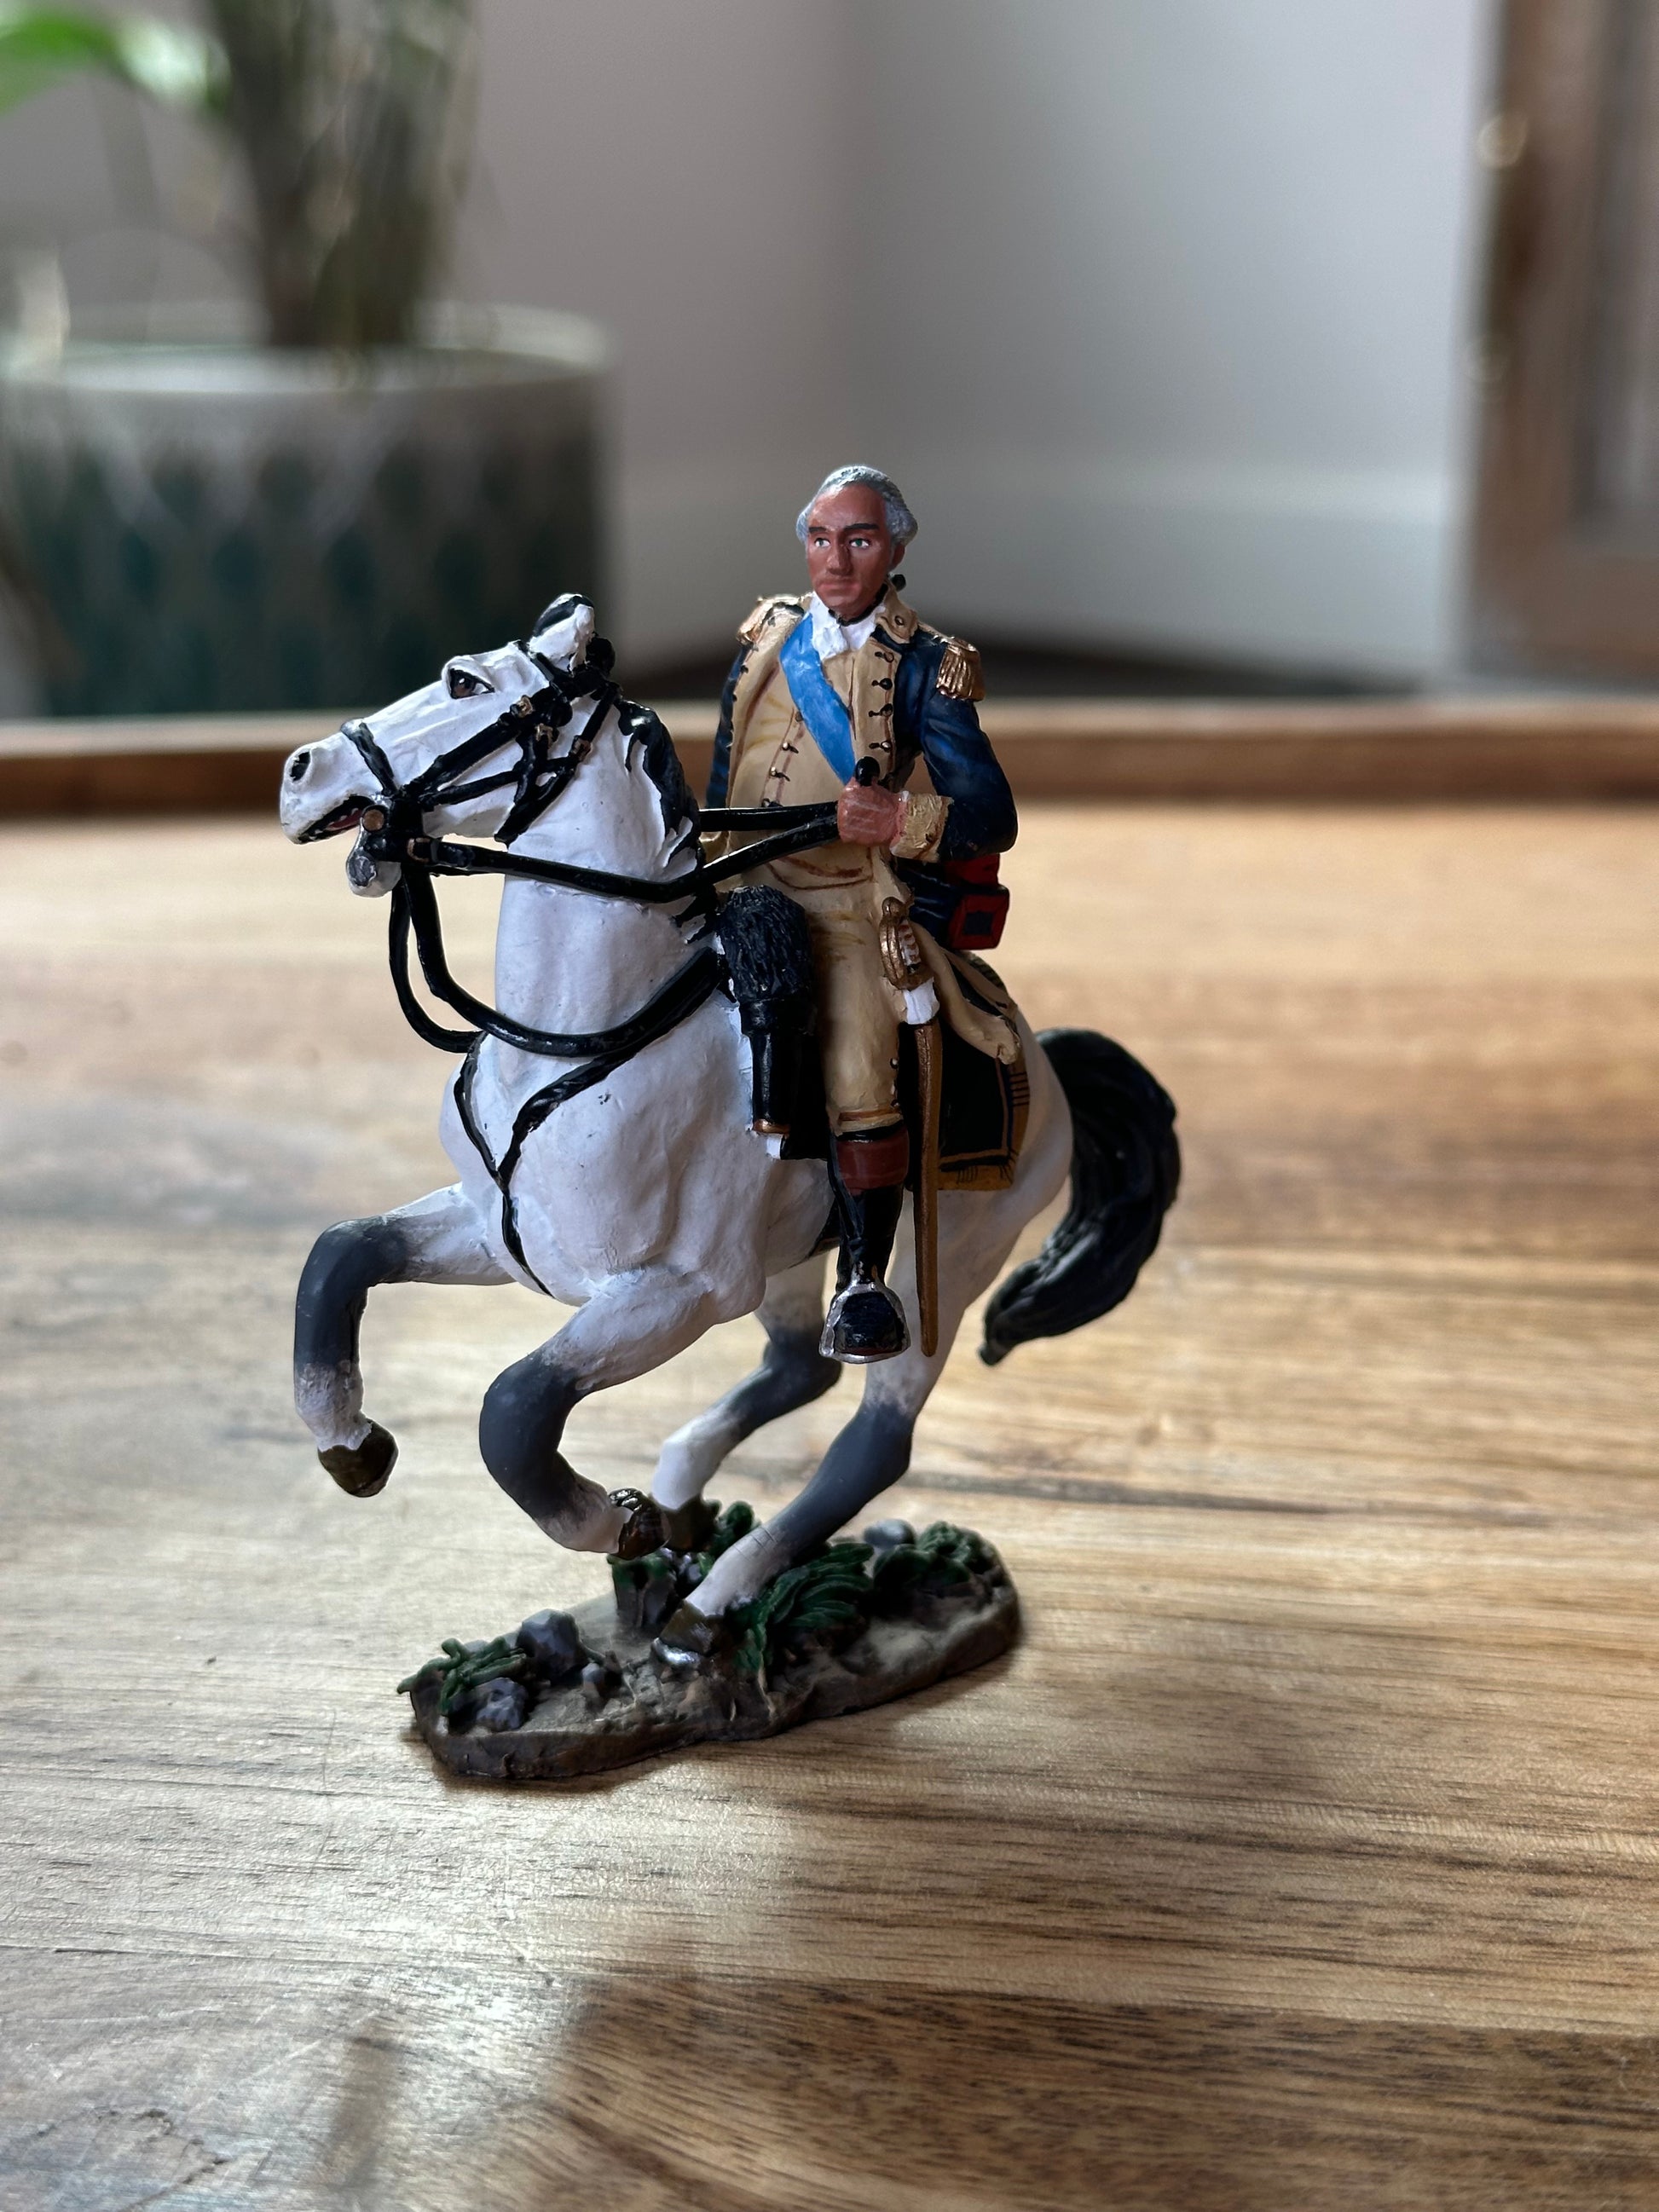 Collectible toy soldier miniature army men George Washington on Horseback. Displayed on a table.